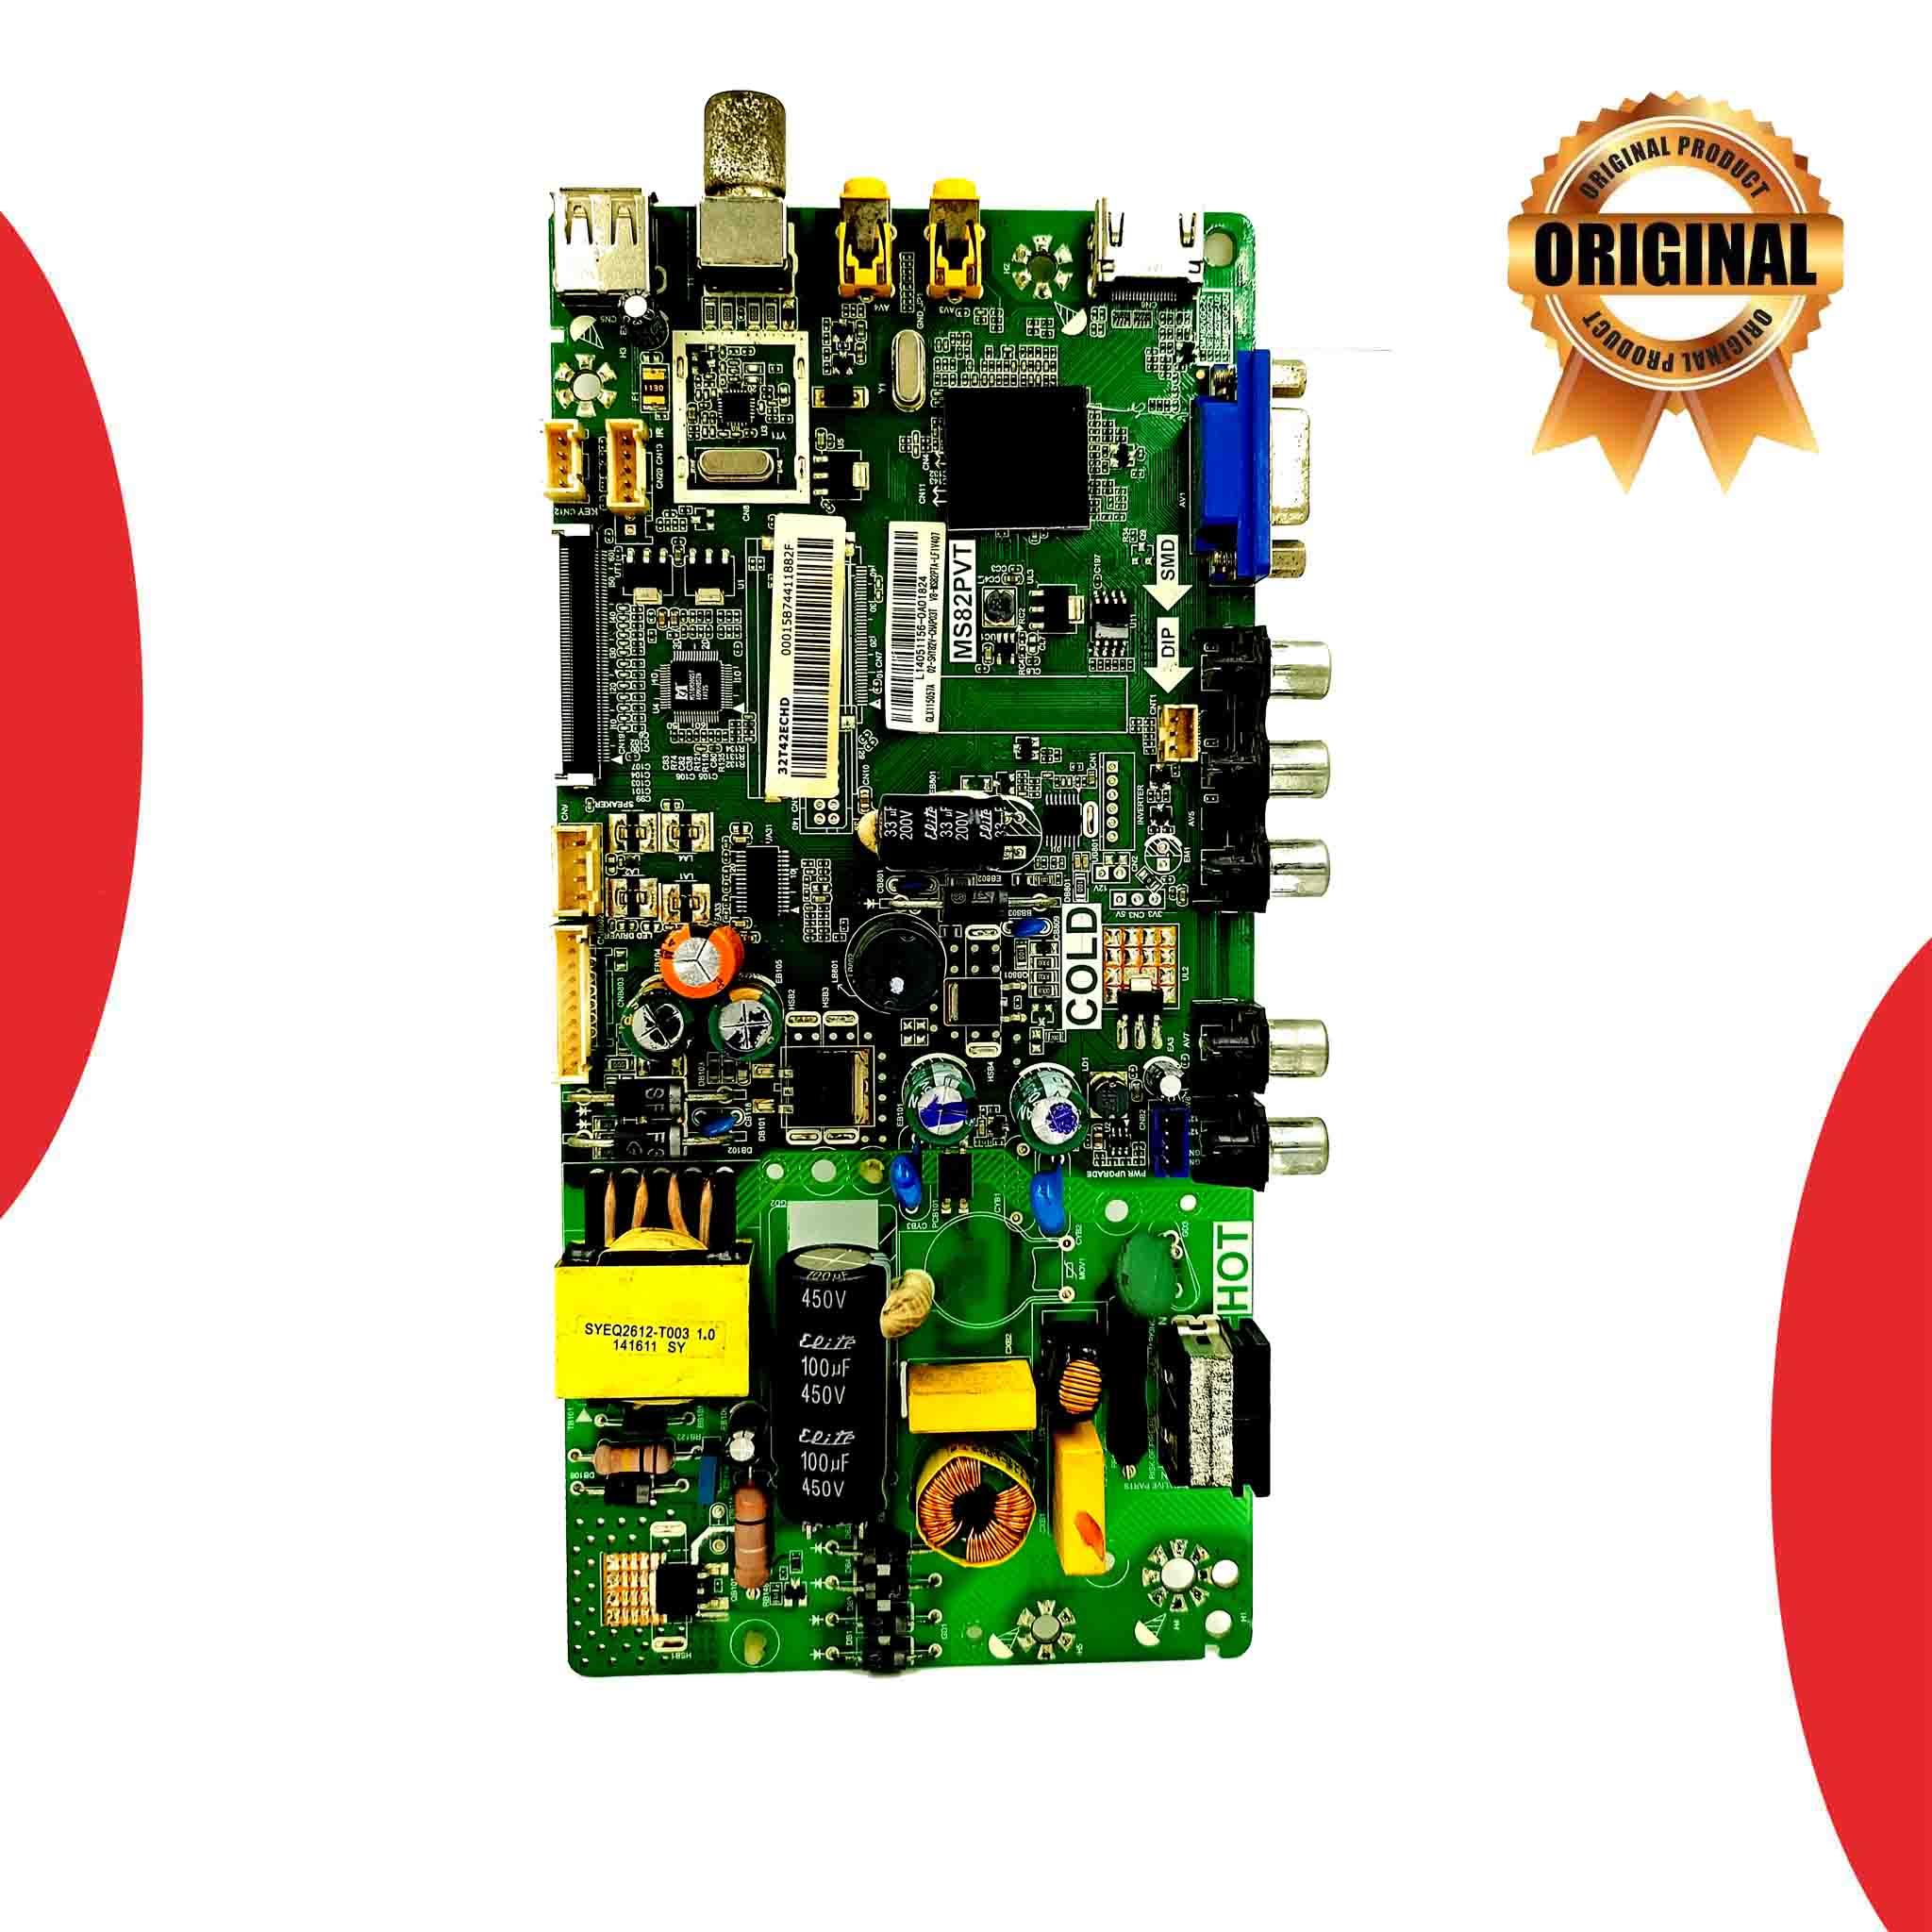 Model 32T42ECHD Micromax LED TV Motherboard - Great Bharat Electronics